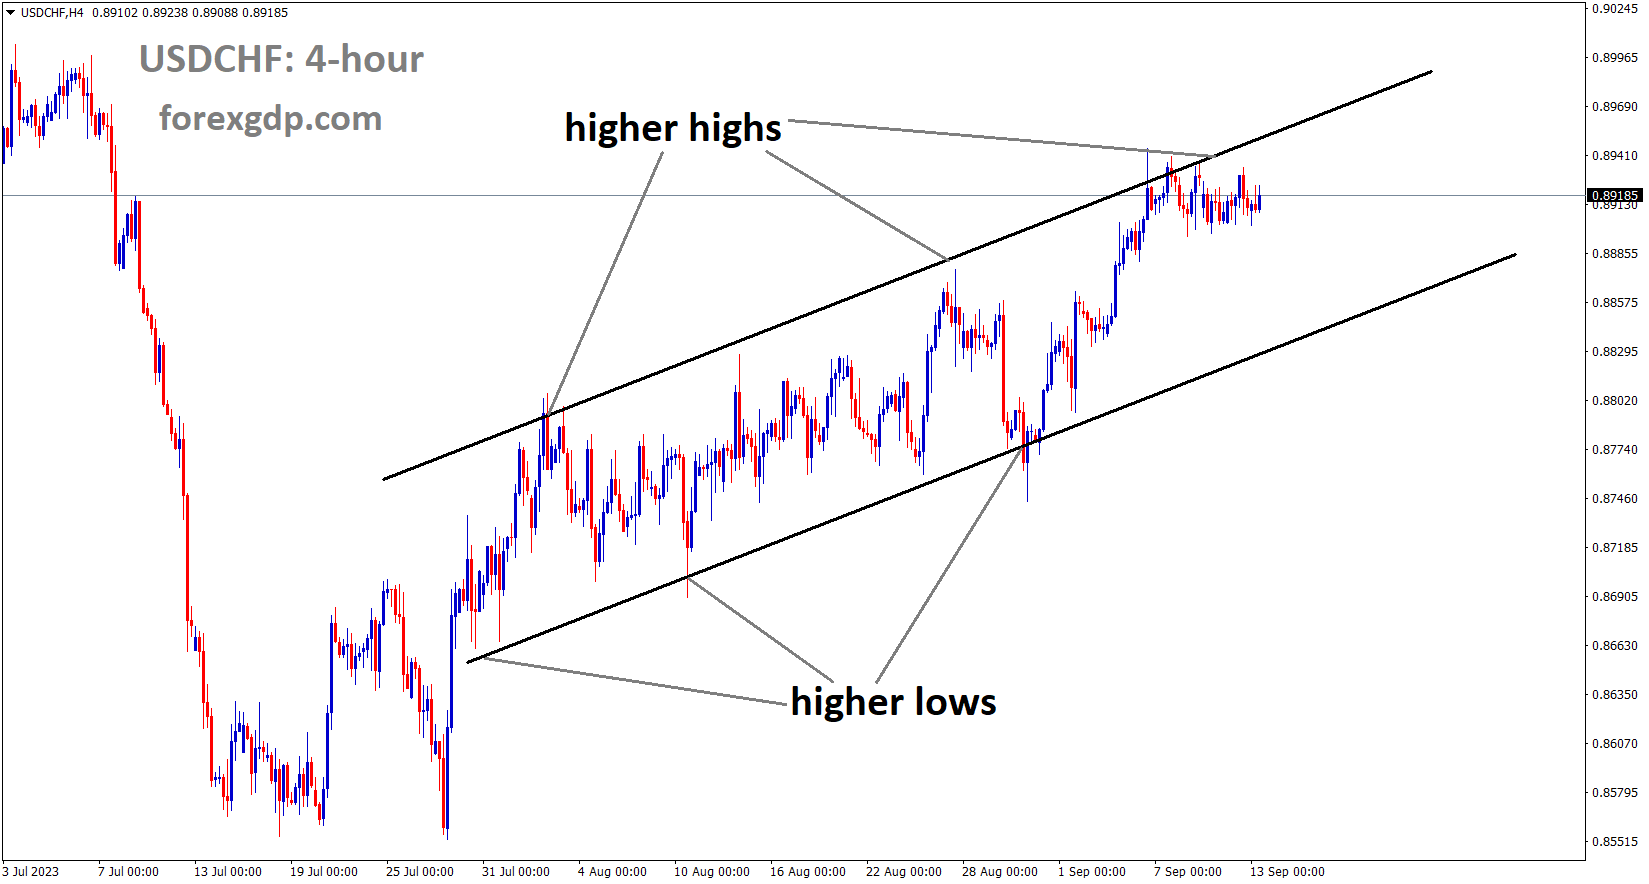 USDCHF is moving in Ascending channel and market has reached higher high area of the channel.